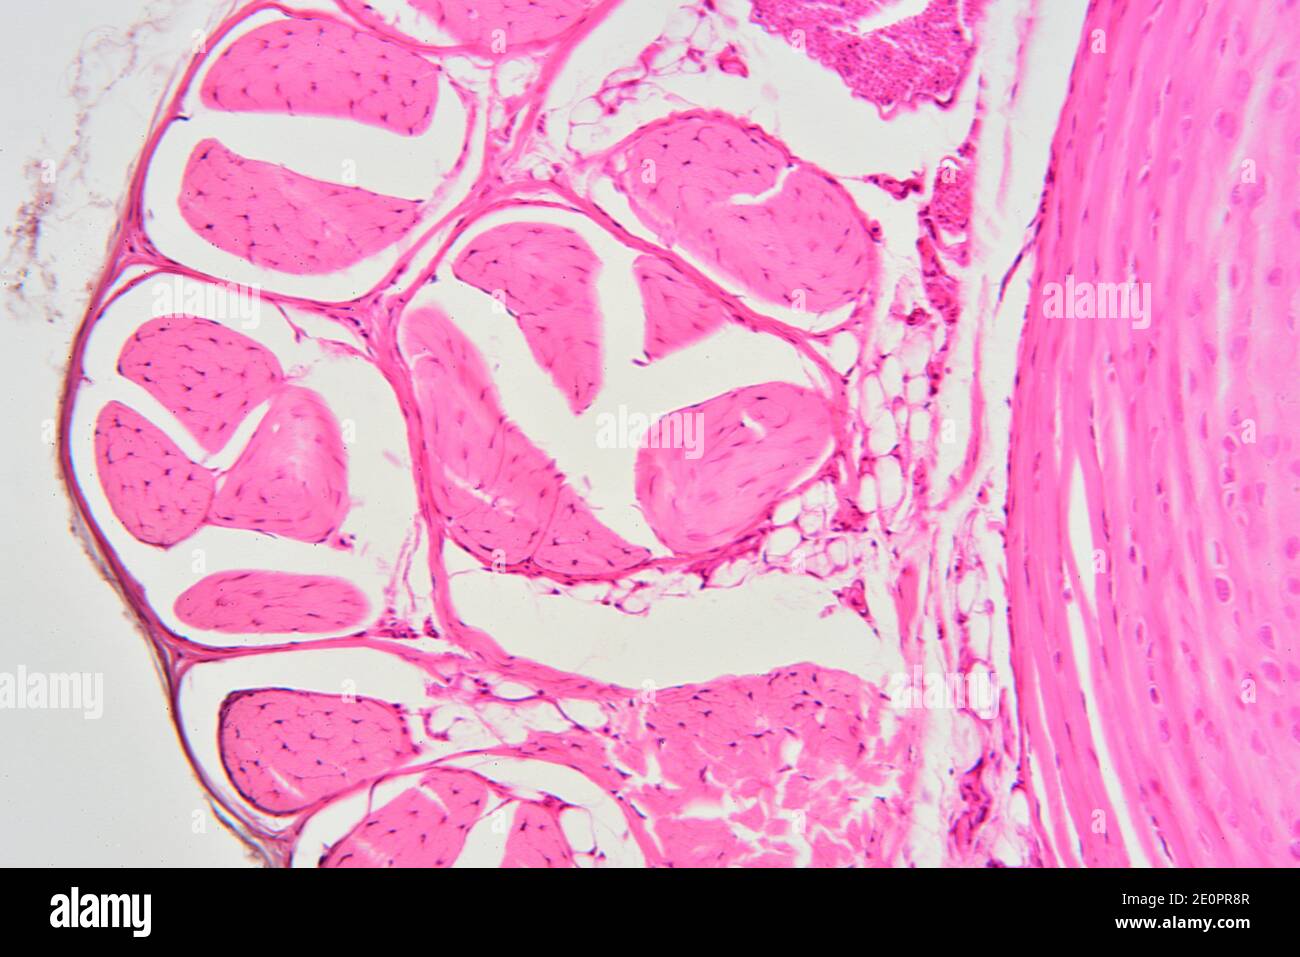 Human tendon. Tendon connect muscle to bone. X125 at 10 cm wide. Stock Photo